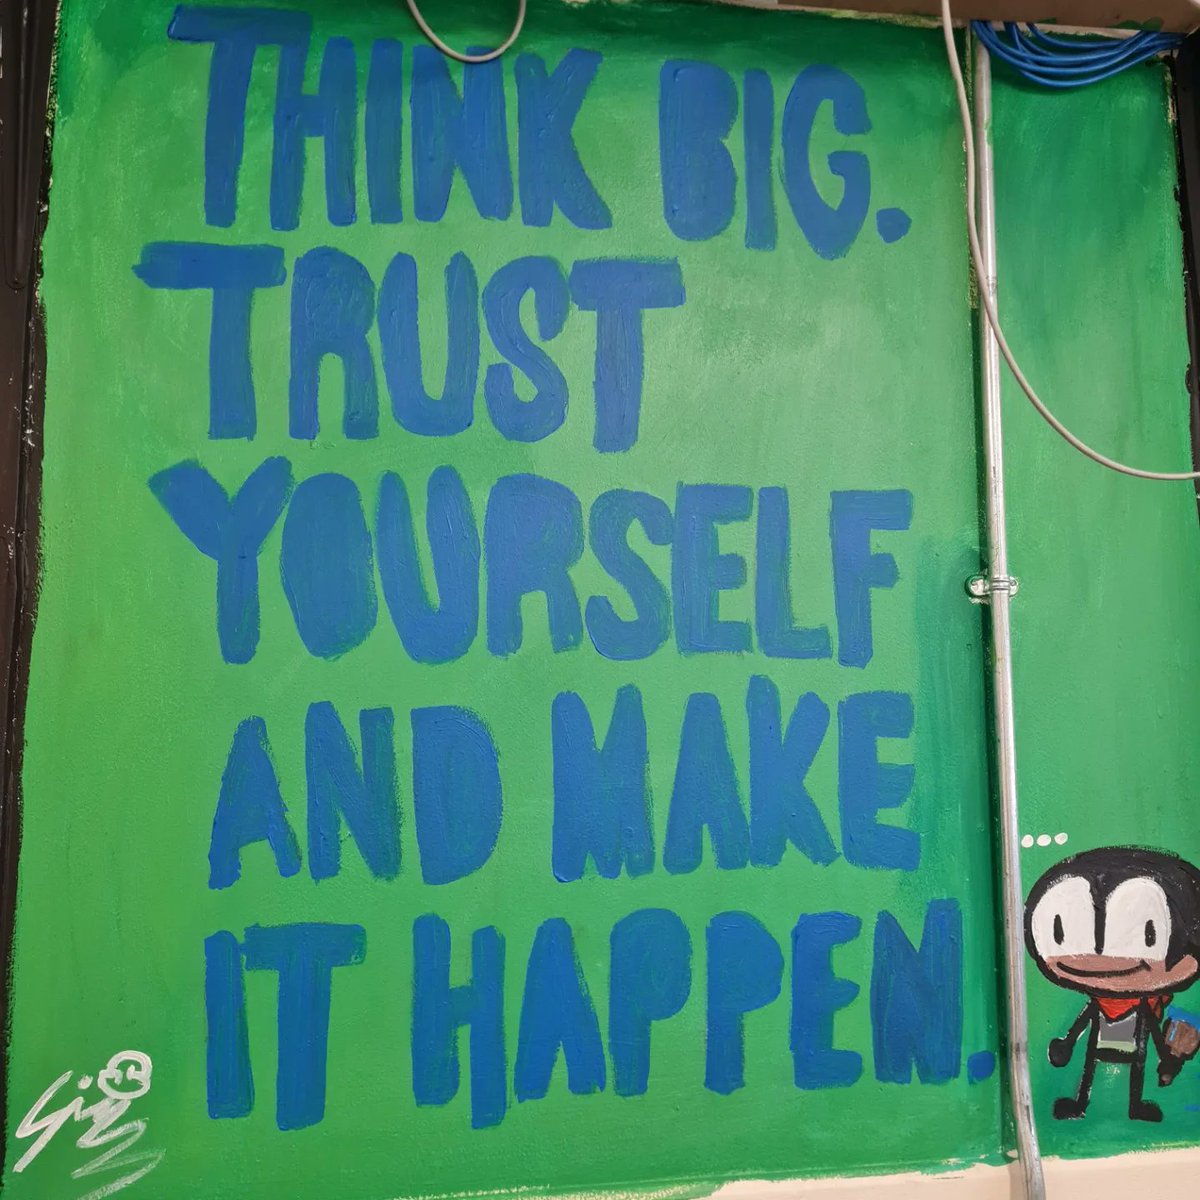 Our LCA1 students have created fabulous murals as part of their religion class! Students were asked to create murals with inspirational quotes from inspirational people around the world, and we think they've done a fantastic job 👏🎨🖌 #hfcsrathcoole #LCA #murals